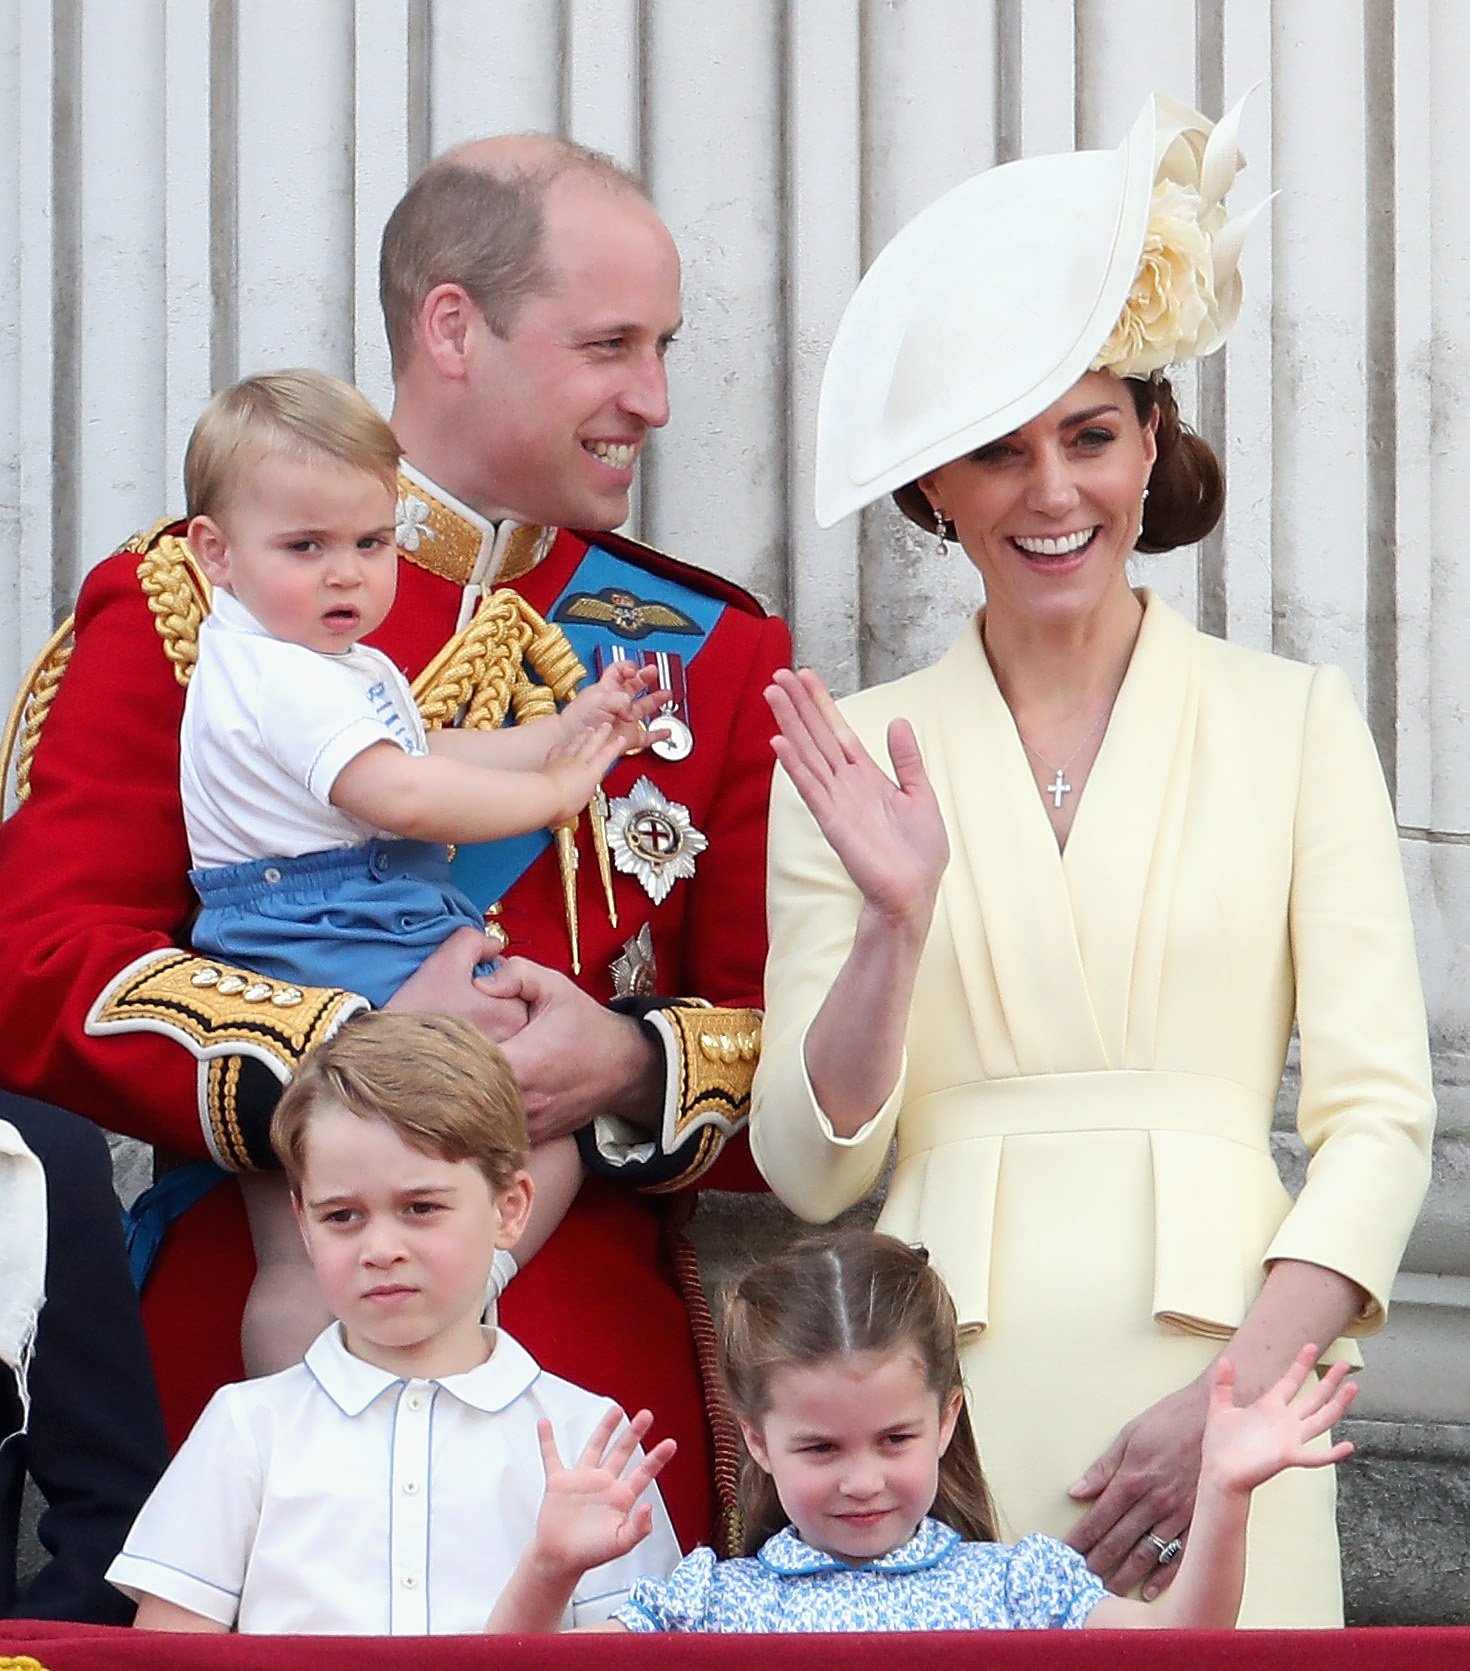 Prince William, Prince Louis, Prince George, Princess Charlotte and Kate Middleton pictured at Trooping the Colour in honor of the Queen's Birthday, 2019, London, England. | Photo: Getty Images